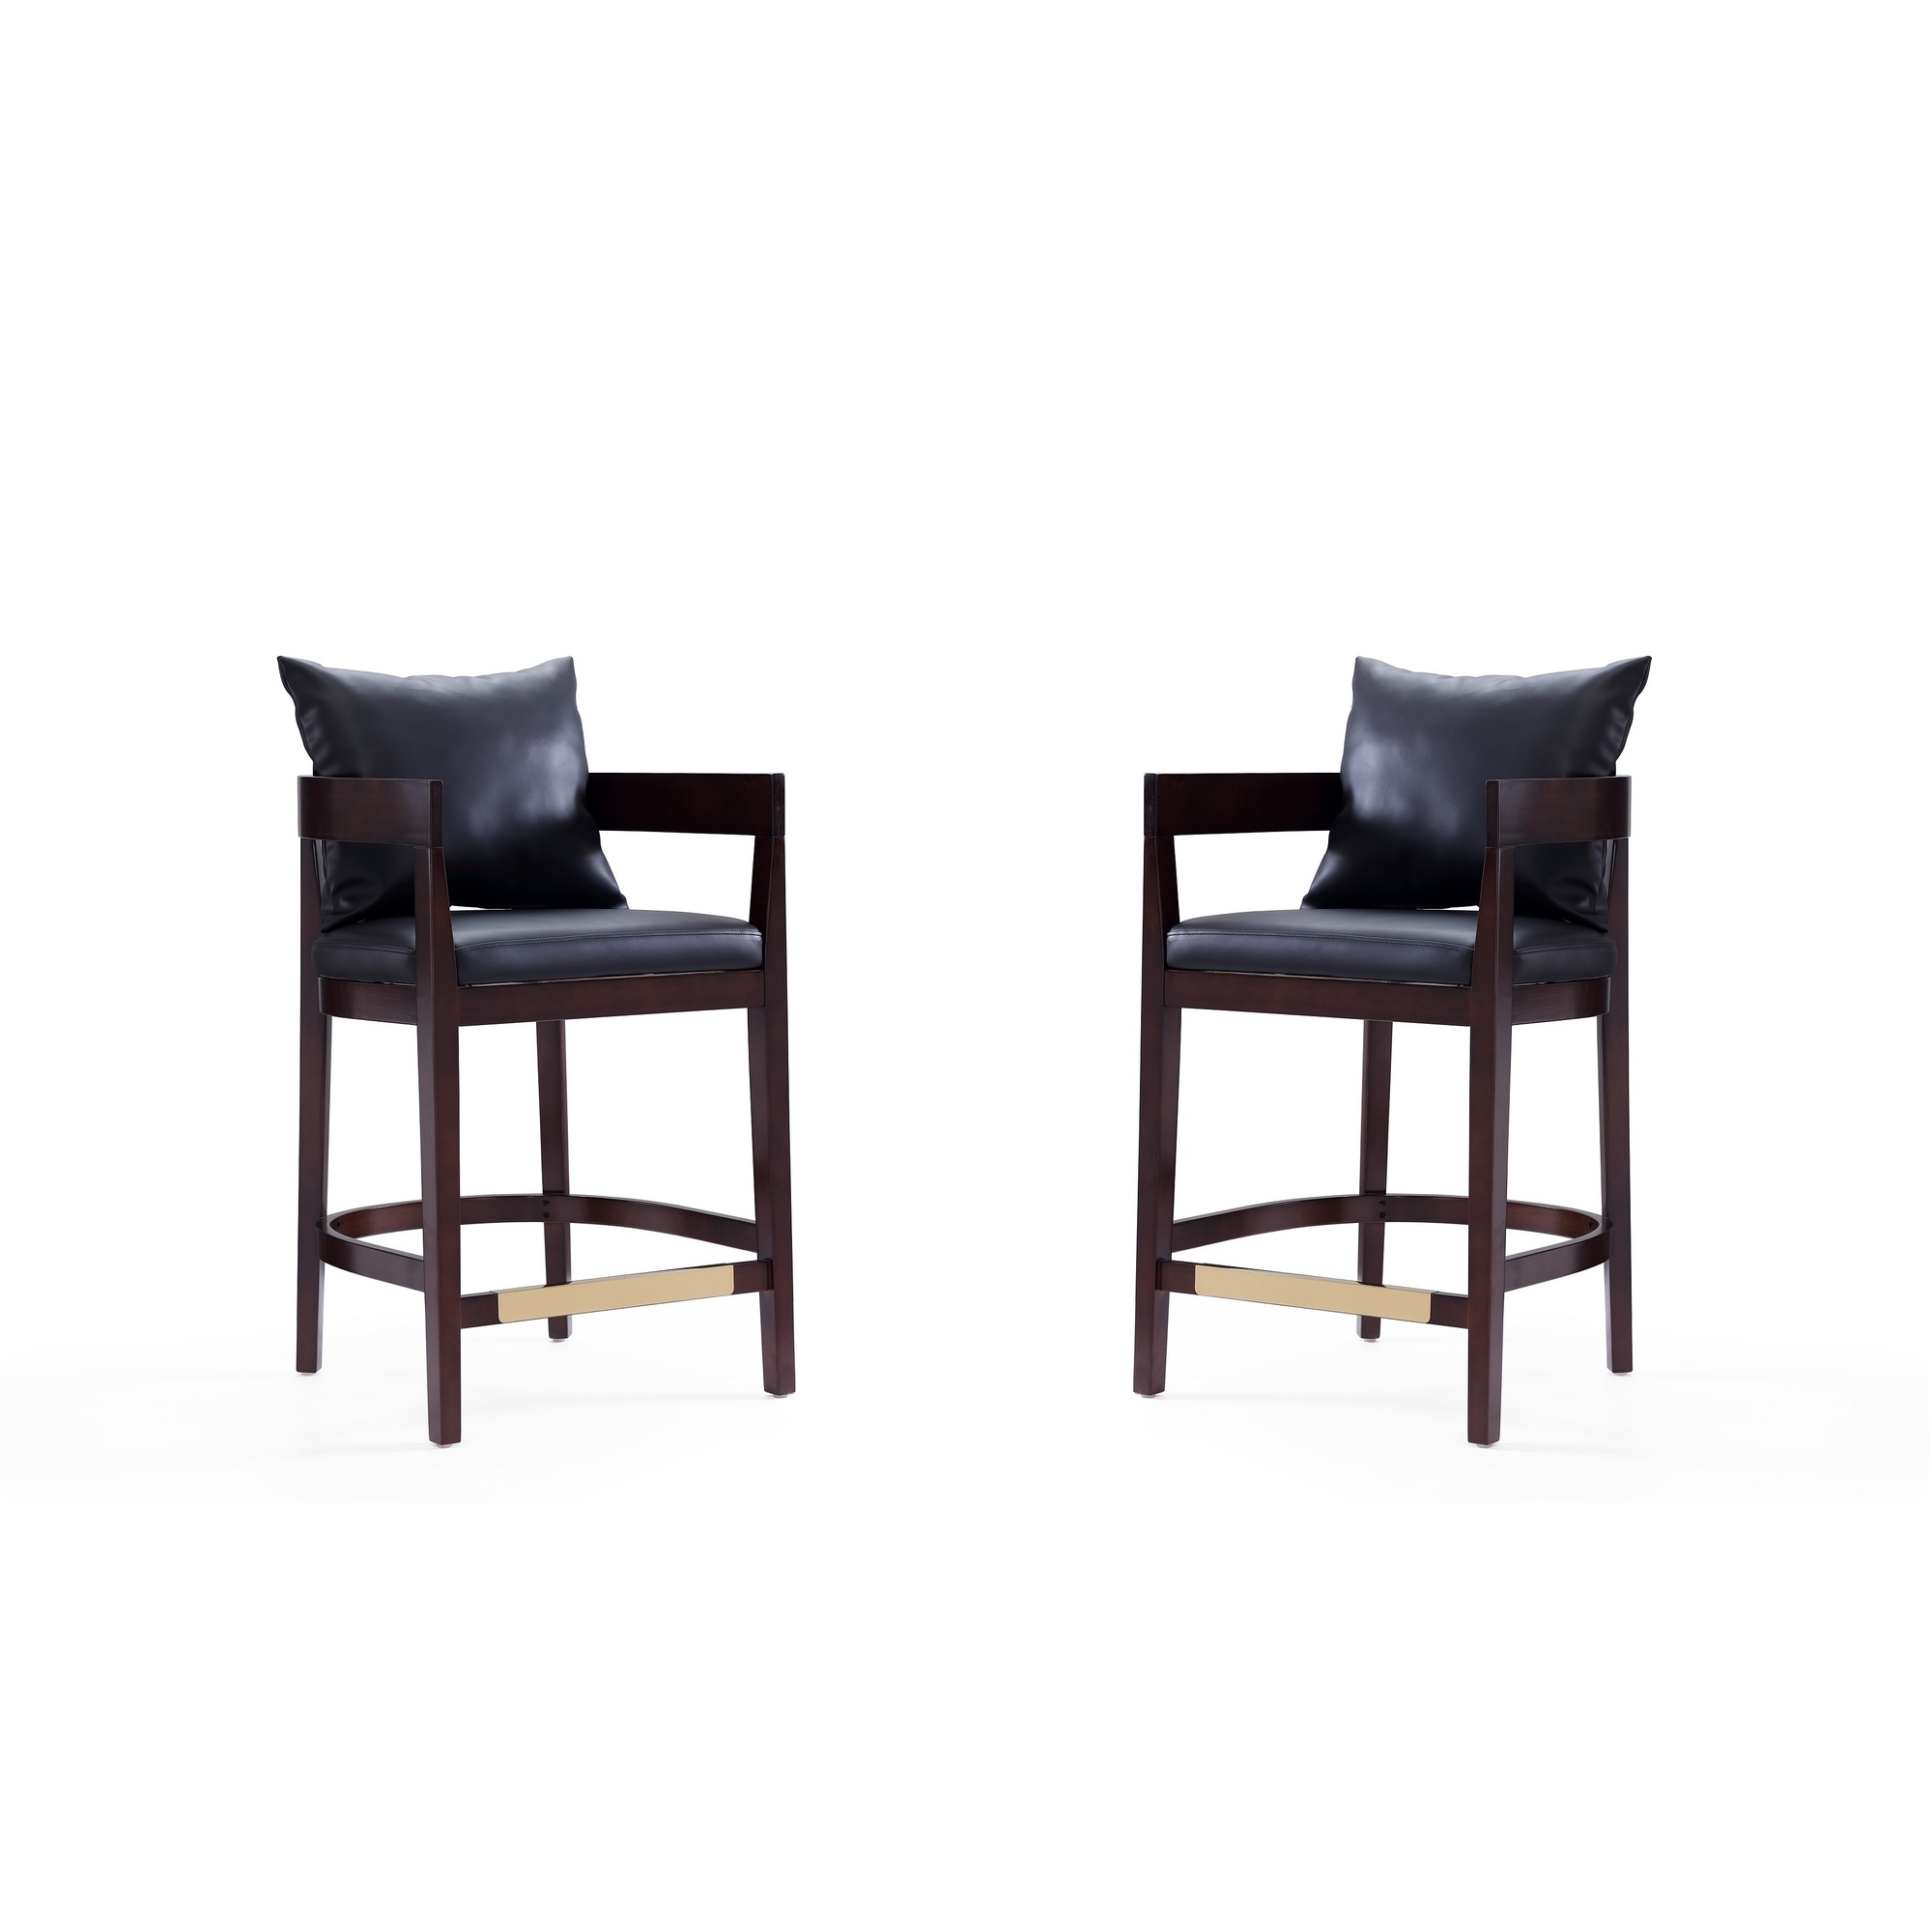 Manhattan Comfort, Ritz 34Inch Black Beech Wood Stool Set of 2 Primary Color Black, Included (qty.) 2 Model 2-CS006